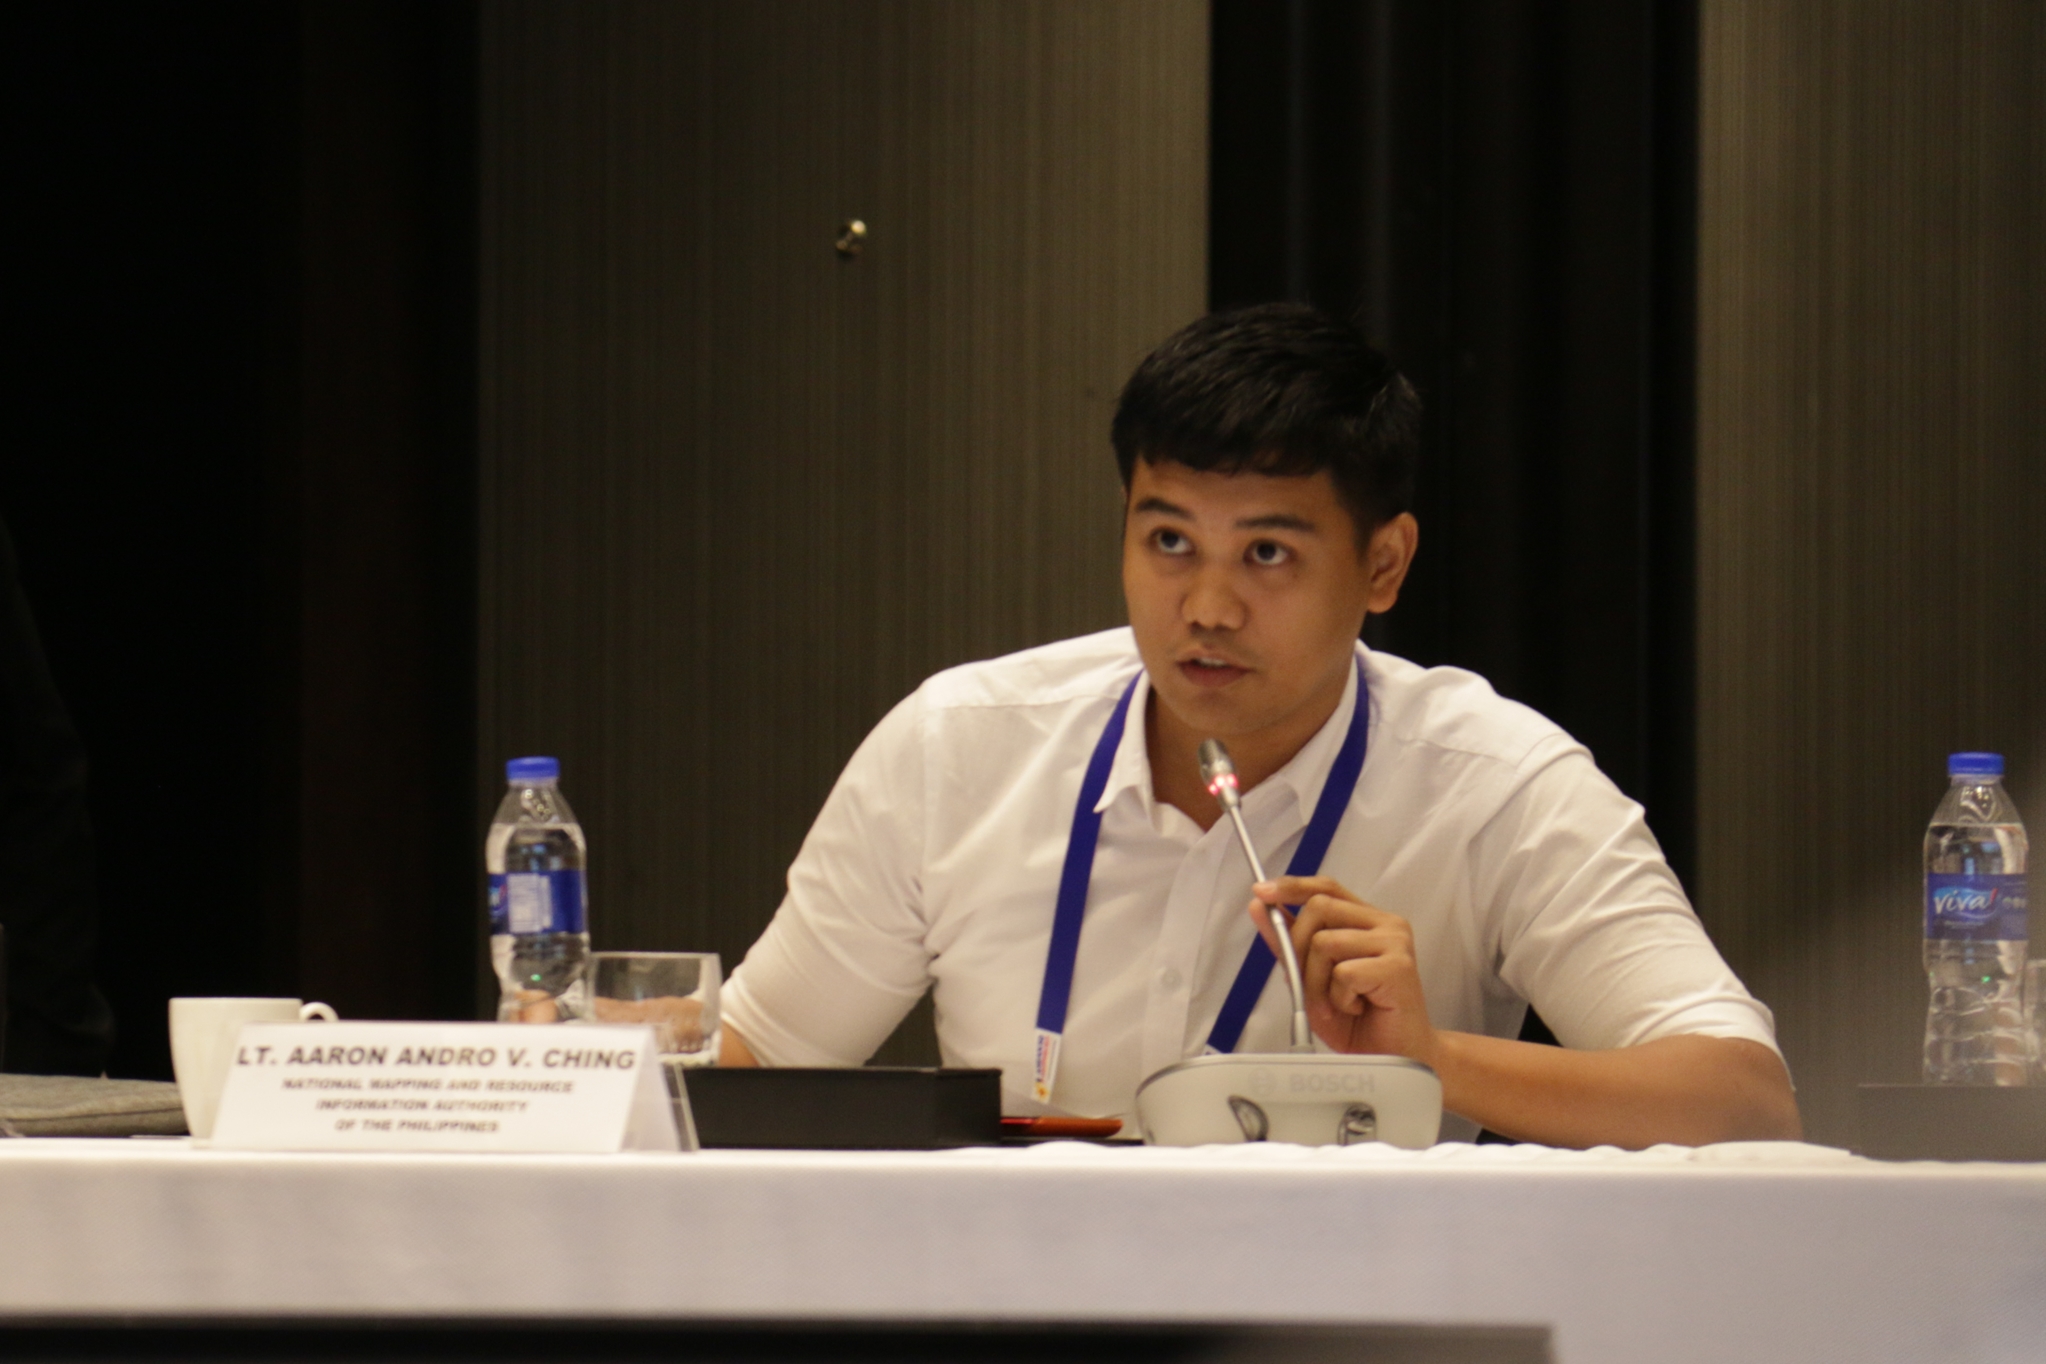 Lt Aaron Andro Ching of Hydrography Branch discuss during the ASEAN Regional Forum Workshop on Best Practices in Implementing Safety of Navigation Instruments